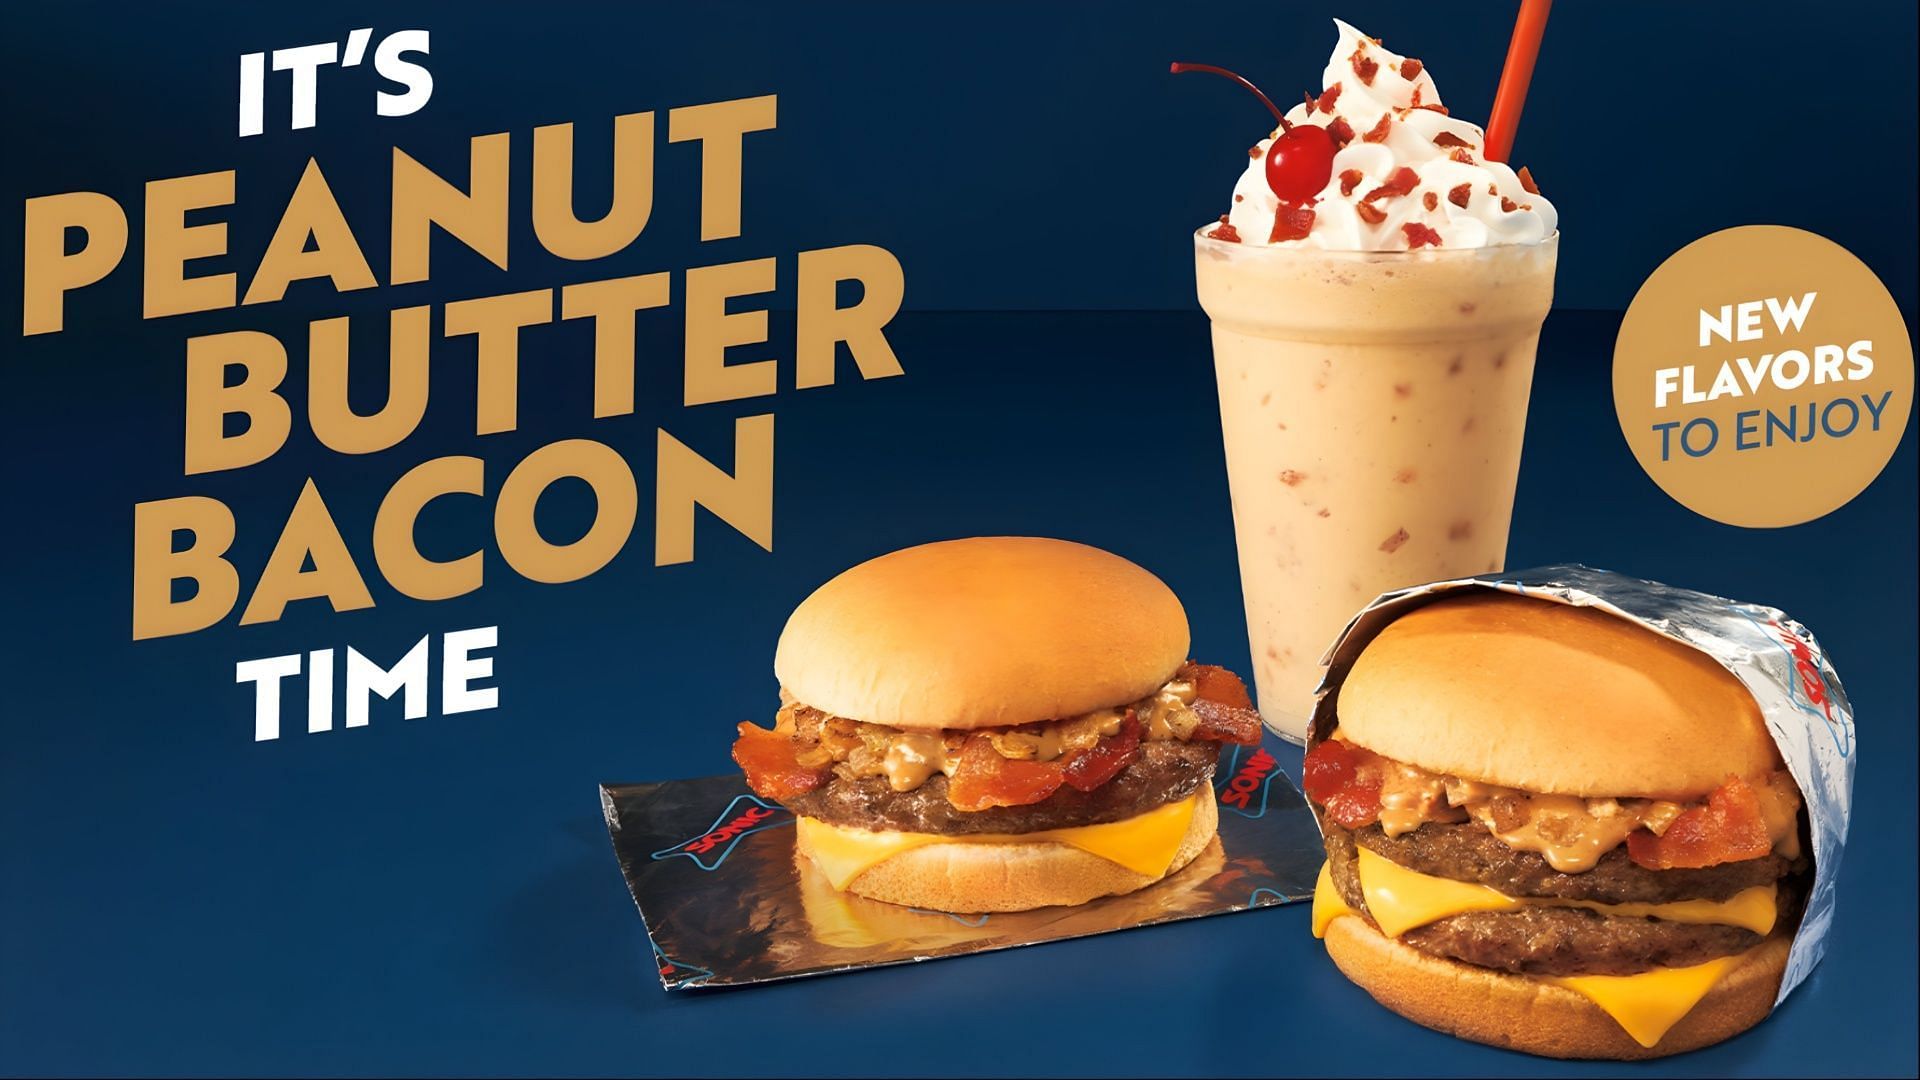 Sonic Drive-In introduces the new Peanut Butter Bacon Shake and the Peanut Butter Bacon SuperSONIC&reg; Double Cheeseburger (Image via Sonic Drive-In /Inspire Brands)